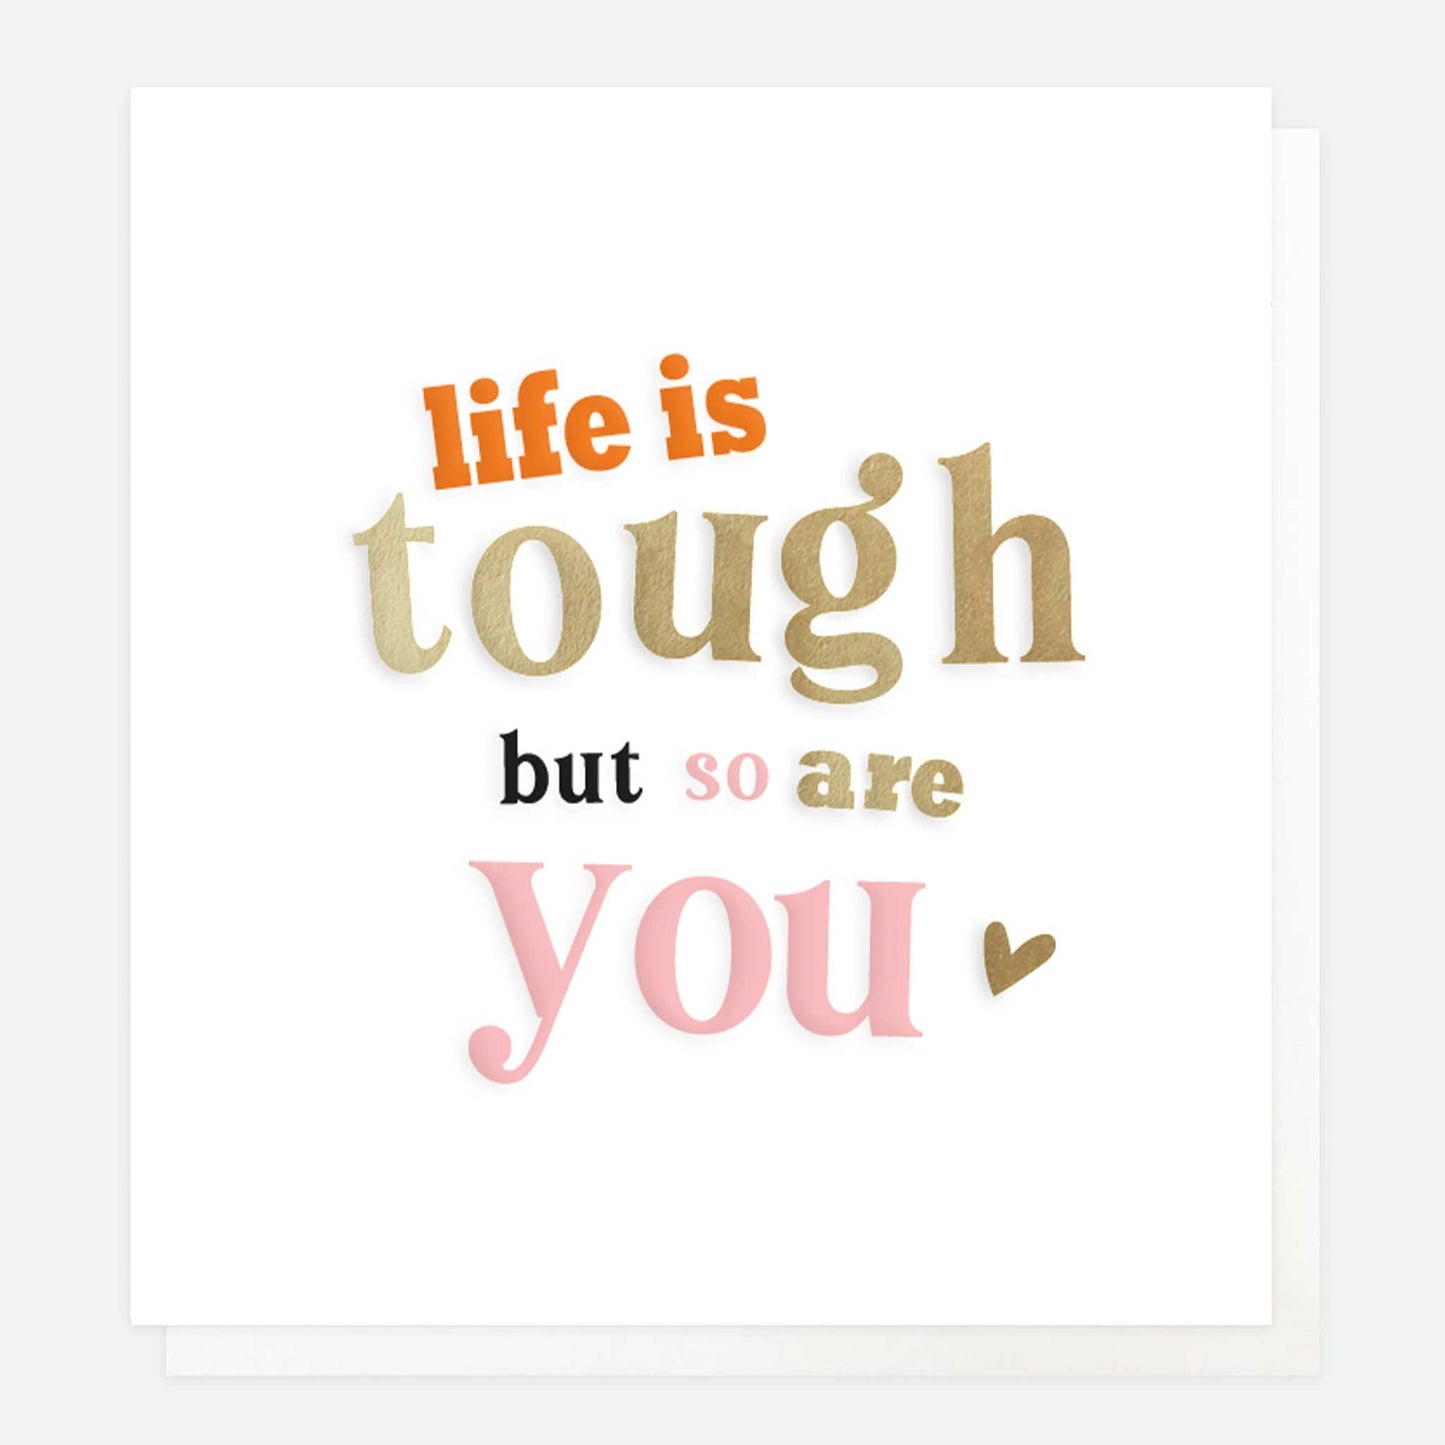 Life is tough but so are you